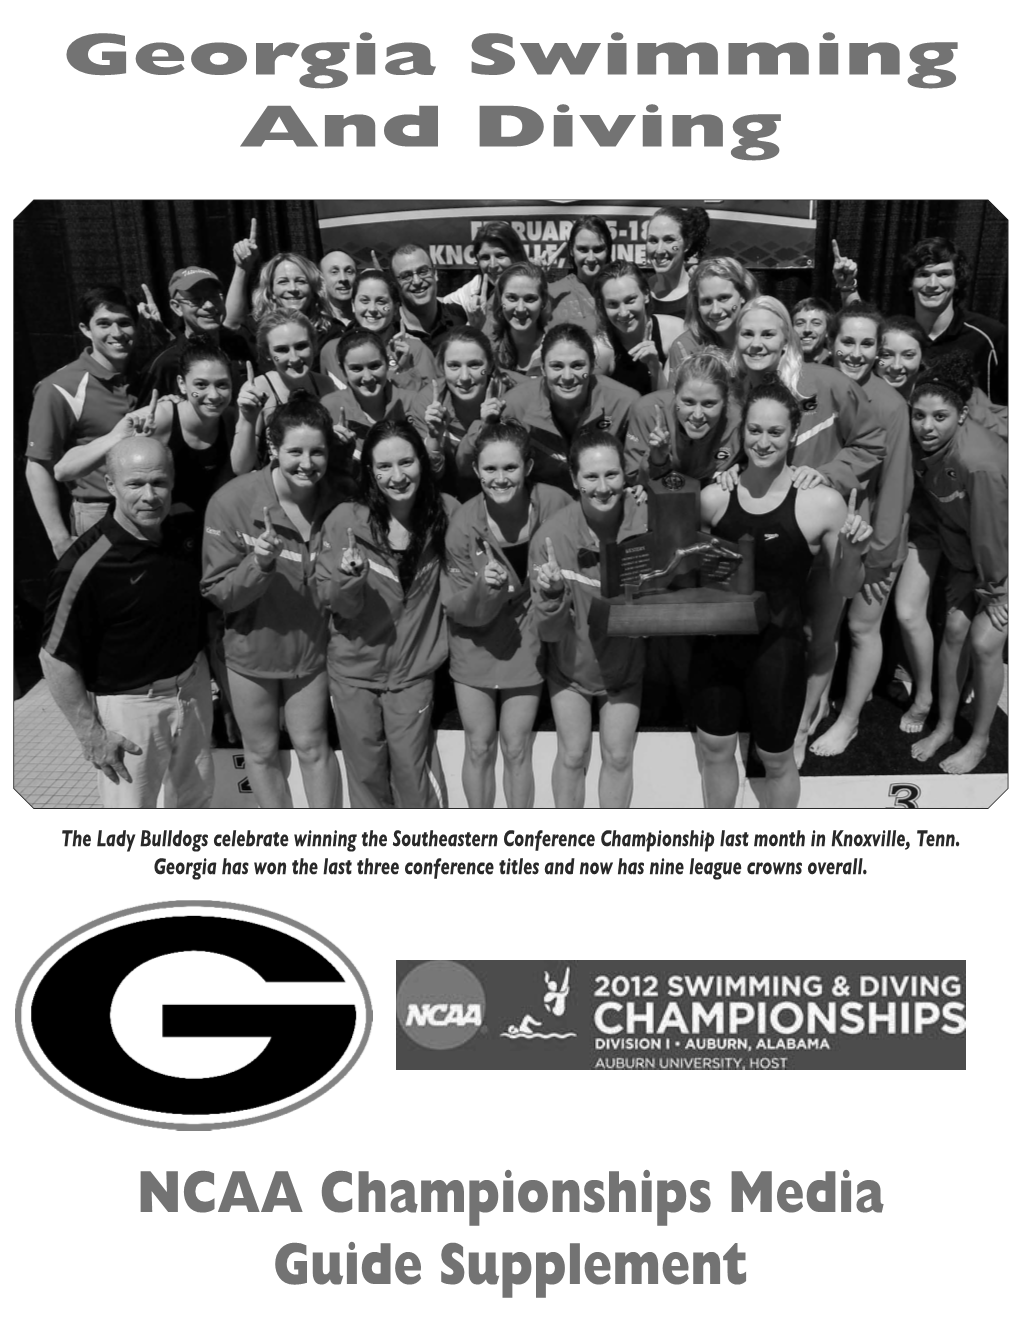 Georgia Swimming and Diving NCAA Championships Media Guide